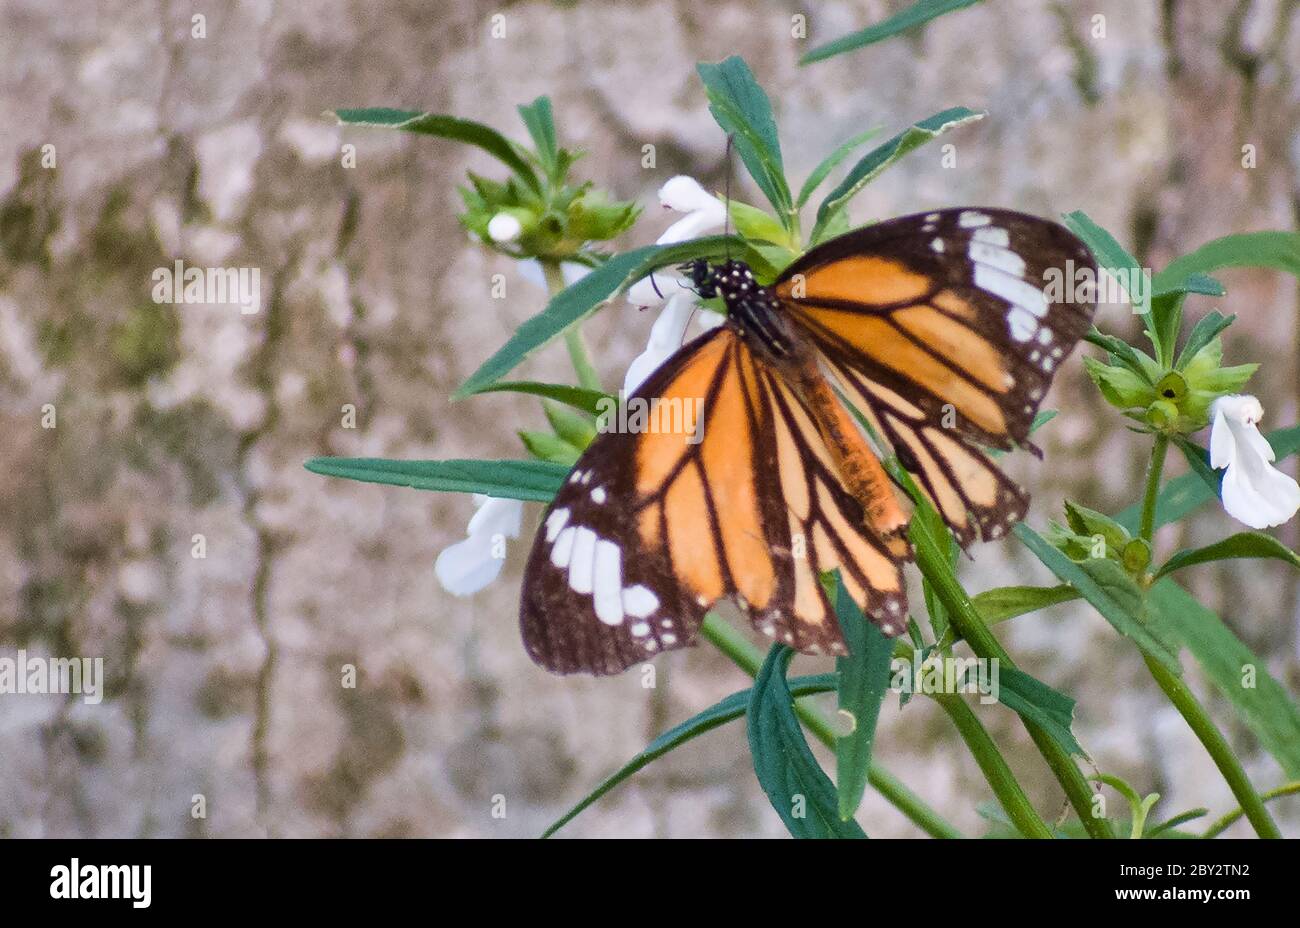 The monarch butterfly or simply monarch is a milkweed butterfly in the family Nymphalidae. Stock Photo